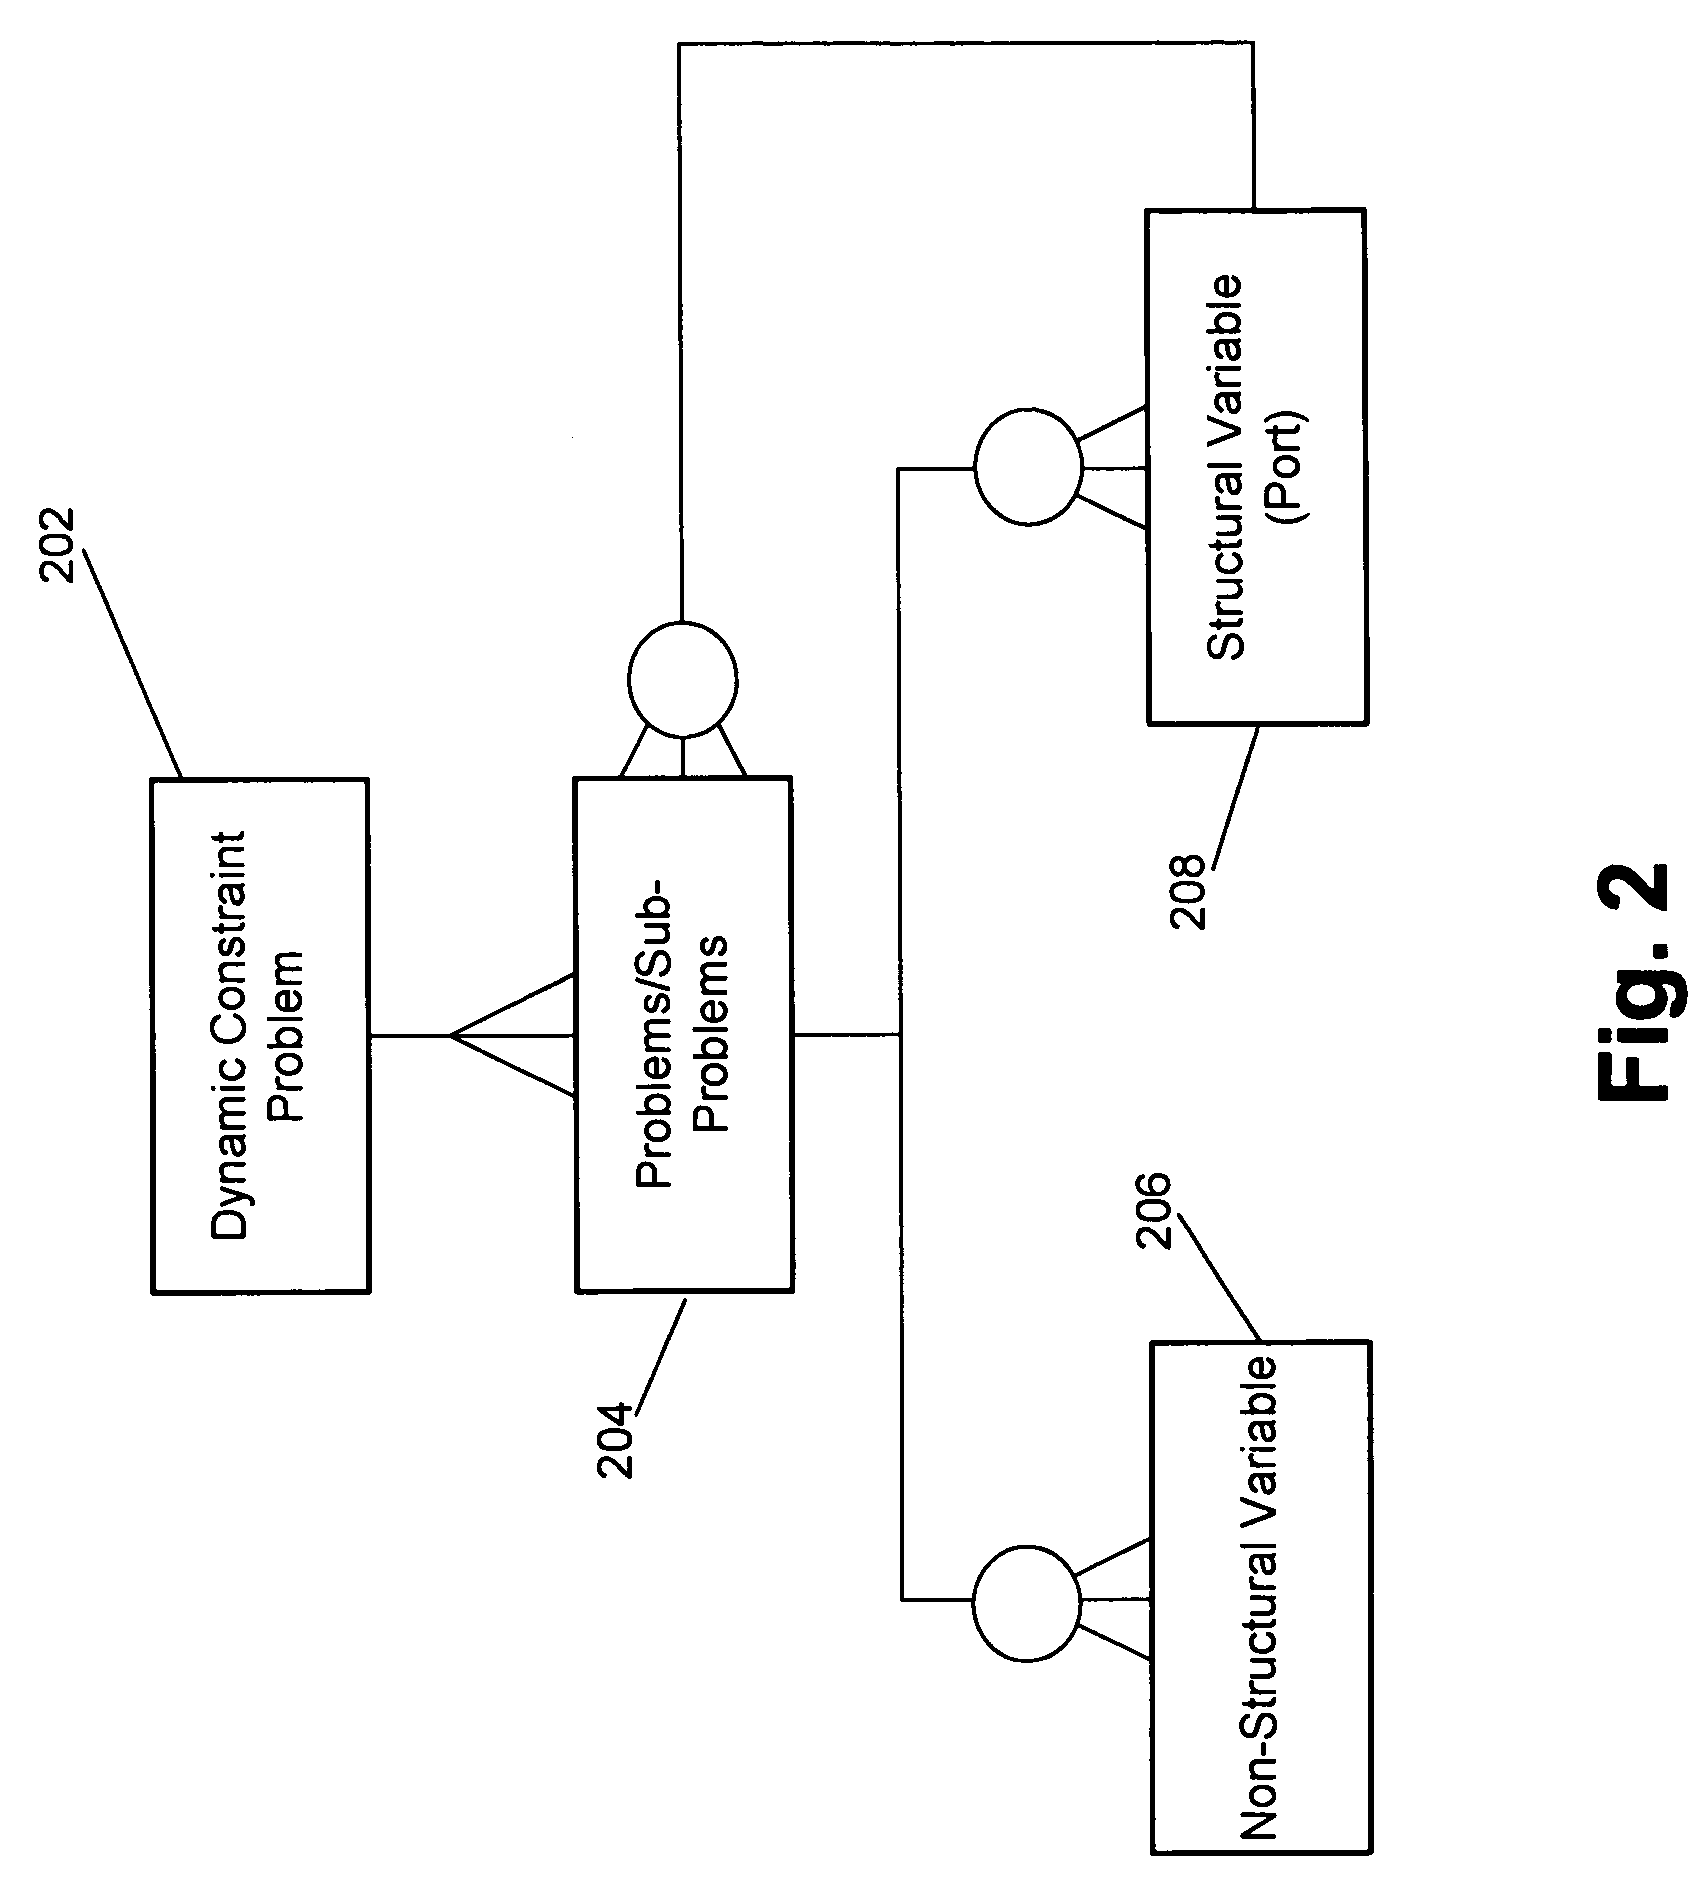 Dynamic constraint satisfaction problem solver with inferred problem association removal